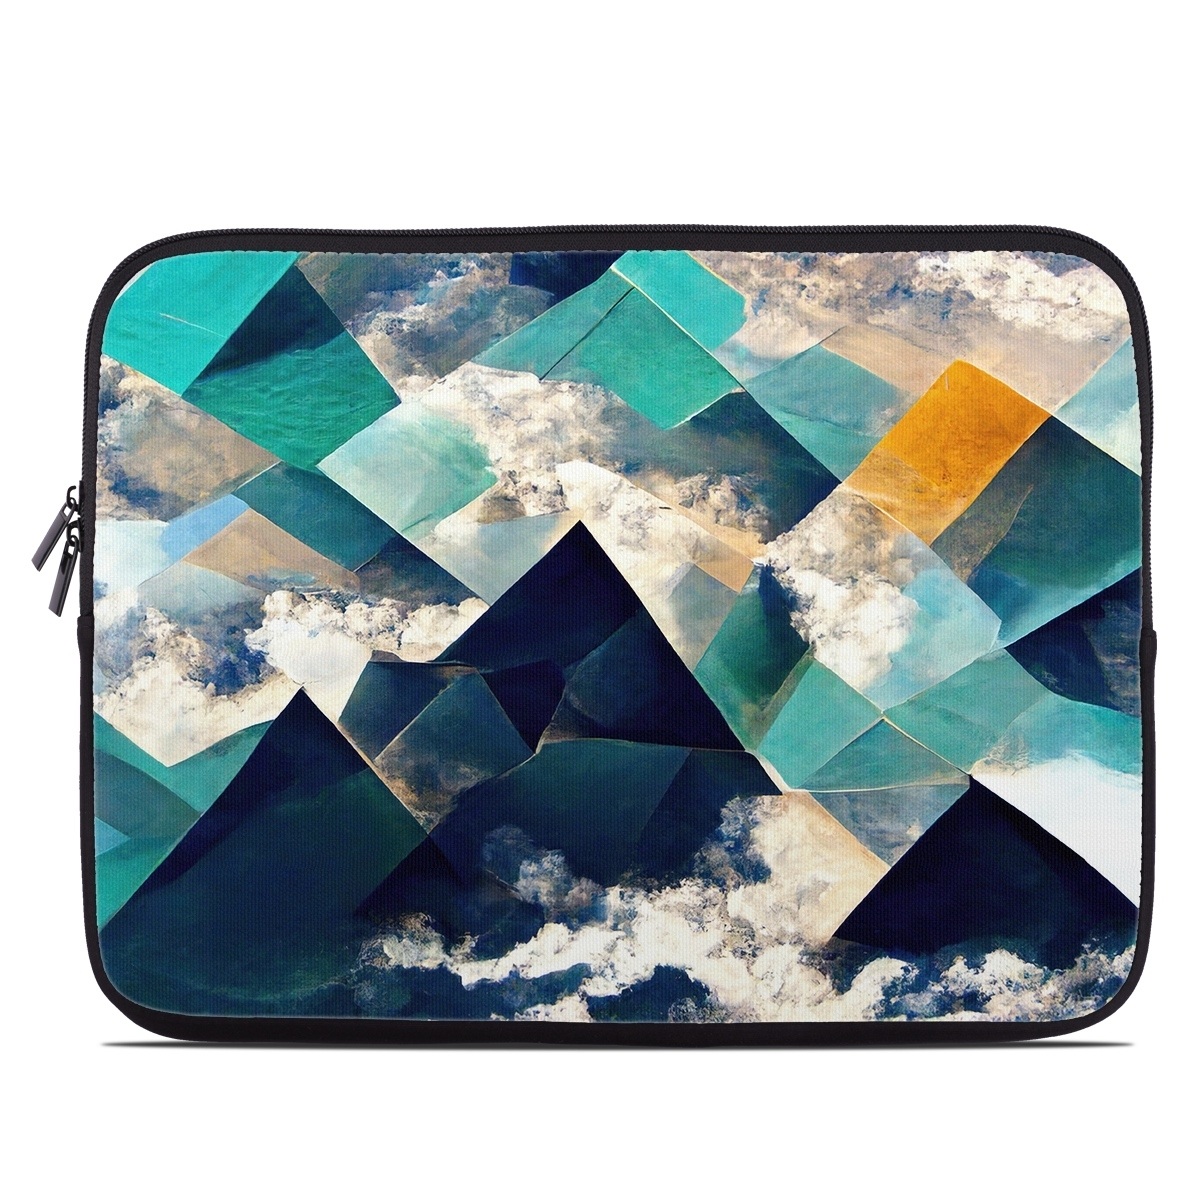 Laptop Sleeve - Gold Clouds (Image 1)